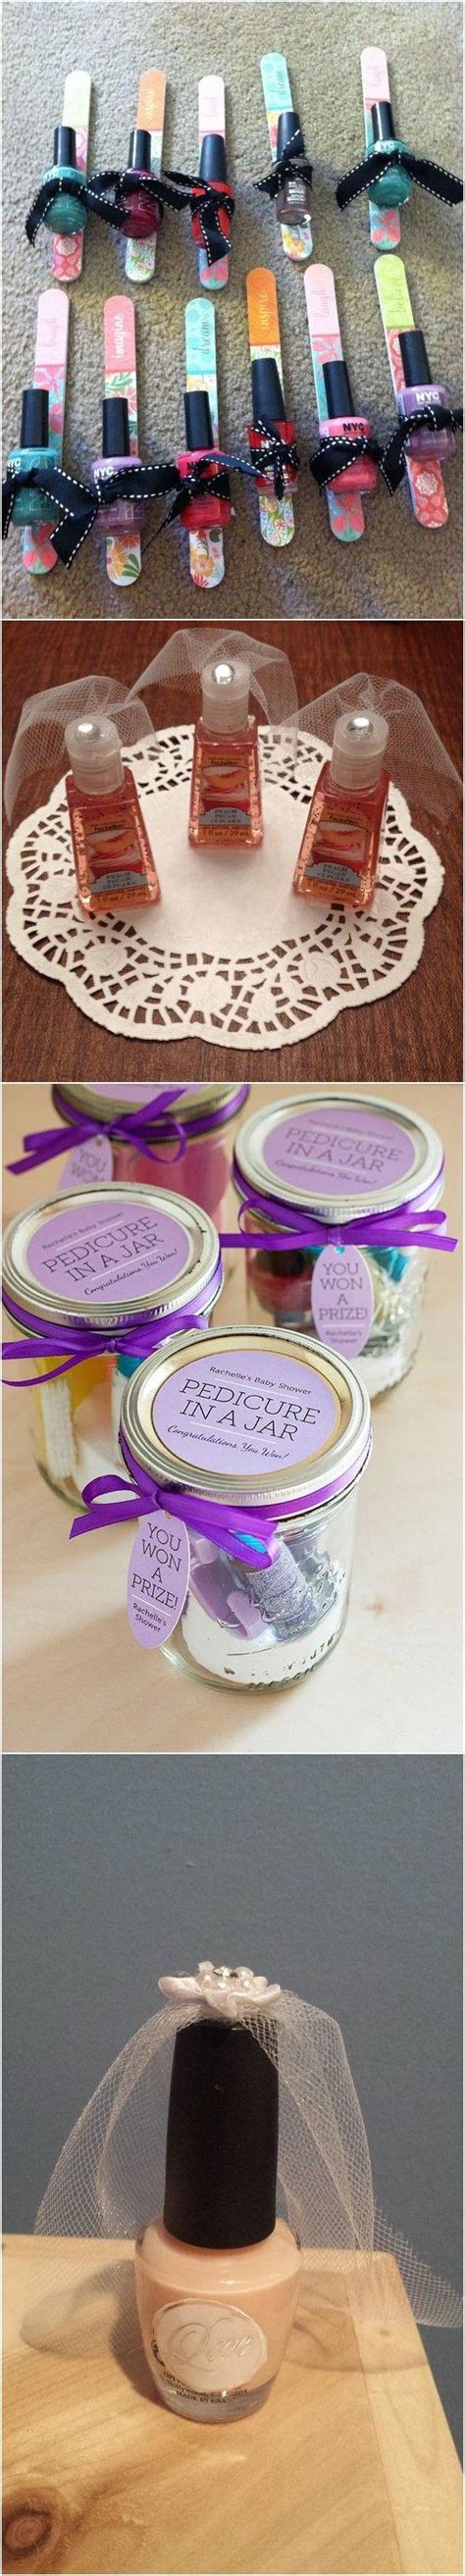 20 Bridal Shower Favor Ts Your Guests Will Like 2692065 Weddbook